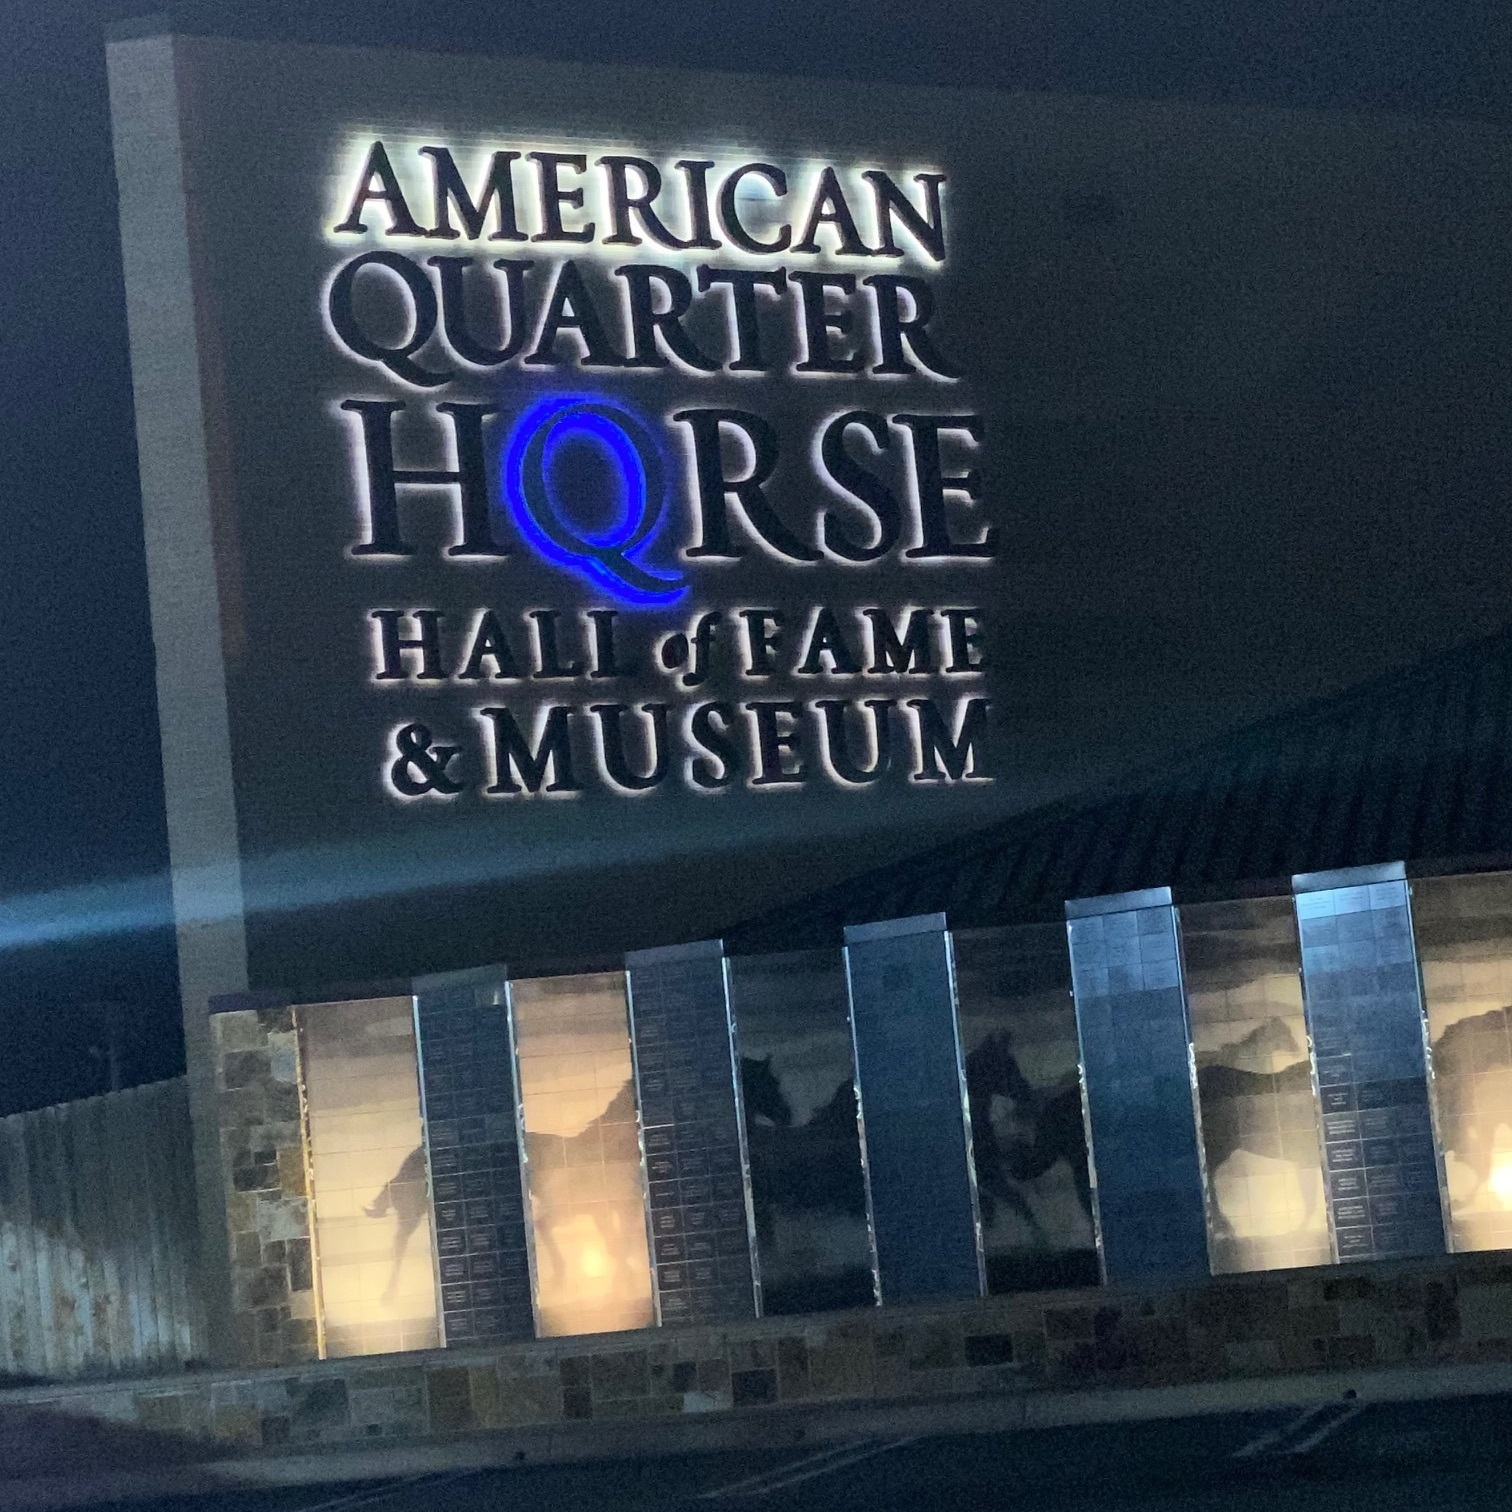 The American Quarter Horse Hall of Fame & Museum